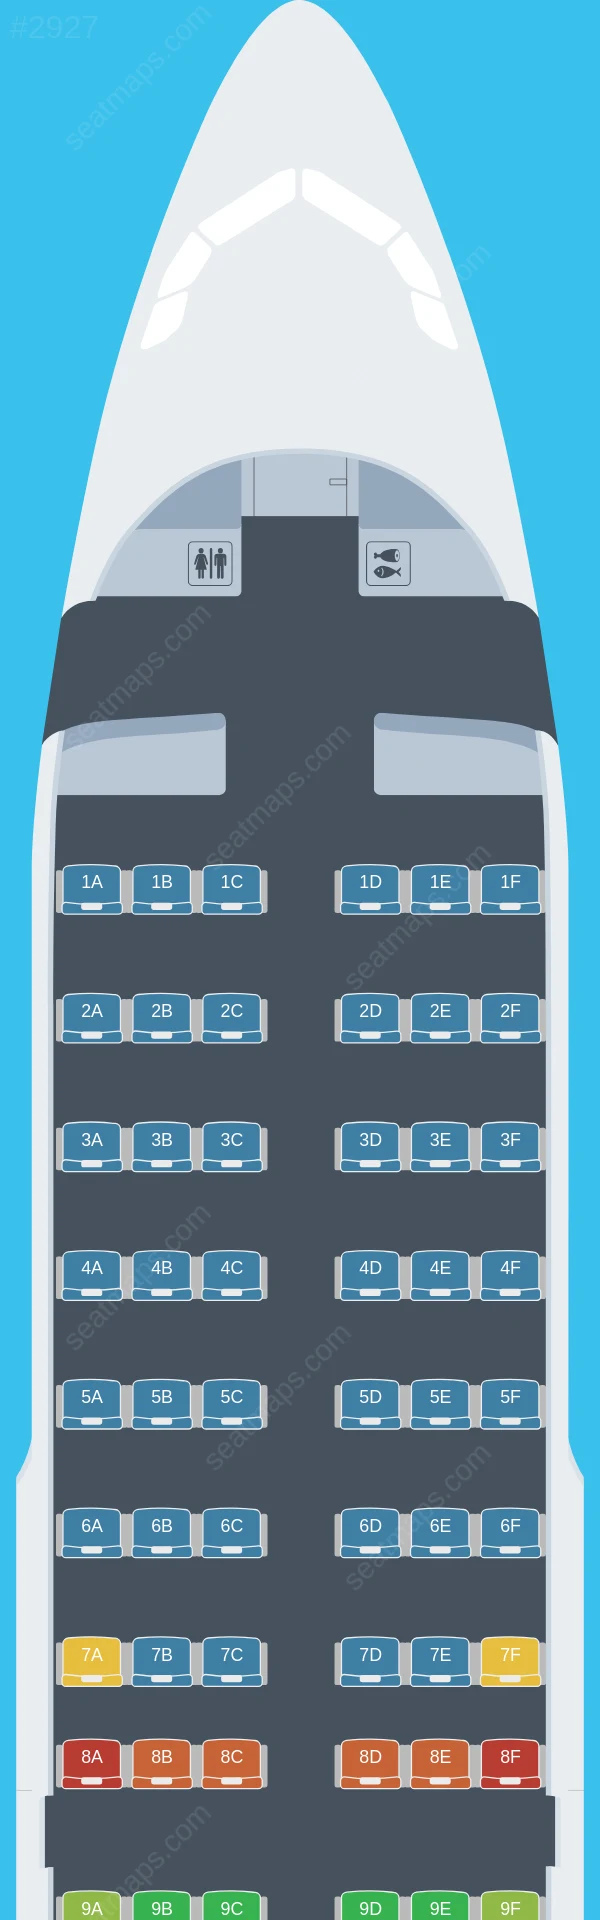 Turkish Airlines Airbus A319-100 seatmap preview